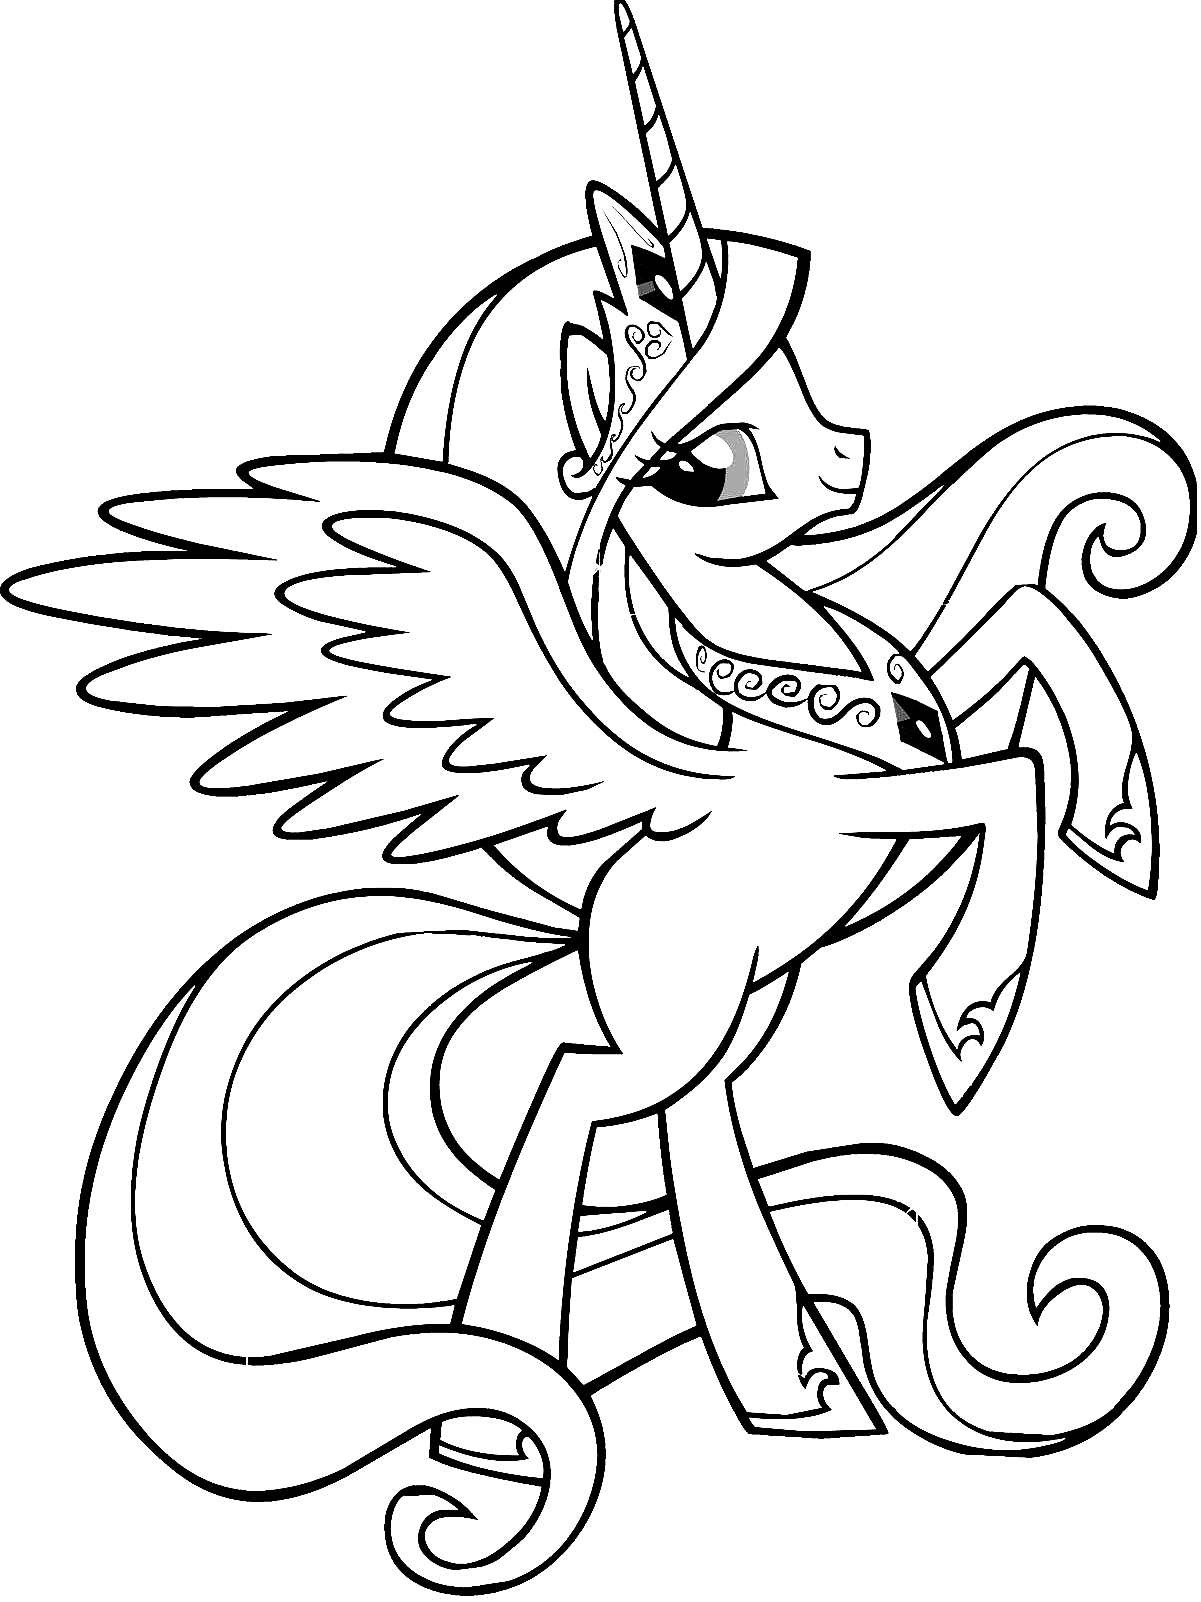 Cute Unicorn-image 4 Coloring Page